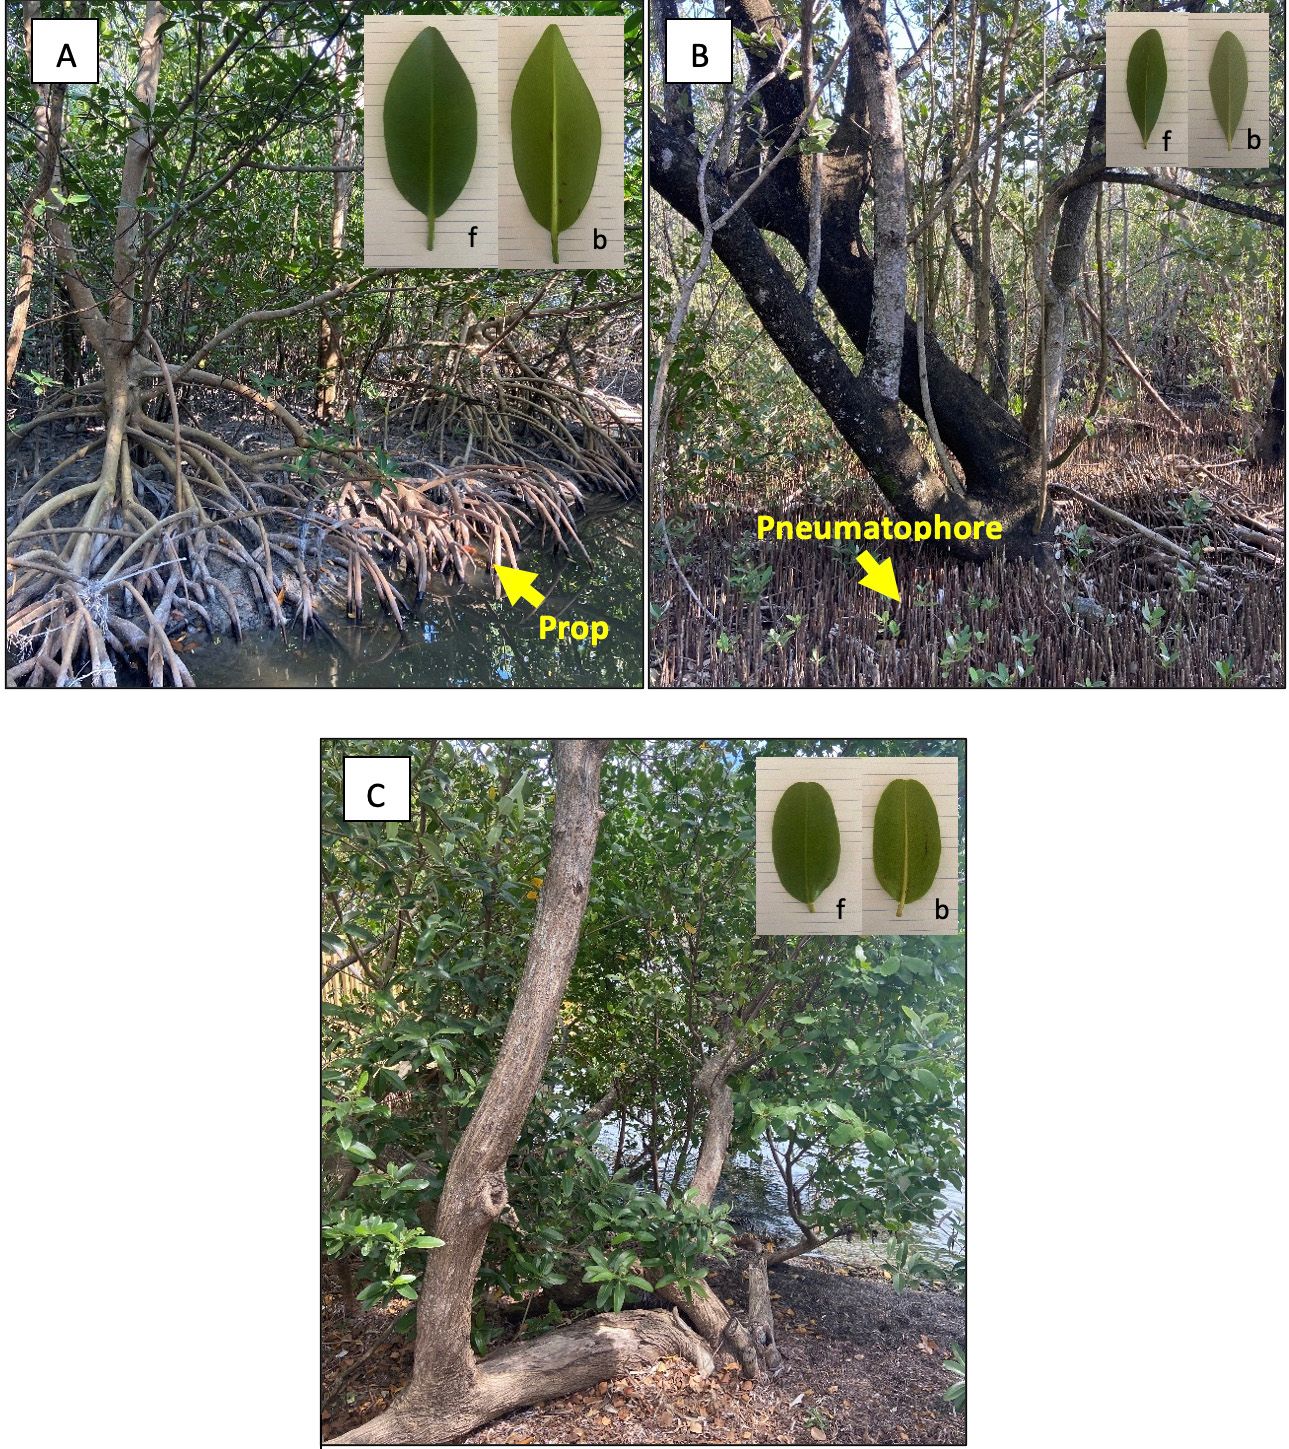 Images of the three native mangrove species found in Florida and the front (f) and back (b) of their leaves: (A) the red mangrove (Rhizophora mangle), (B) the black mangrove (Avicennia germinans), and (C) the white mangrove (Laguncularia racemosa). 